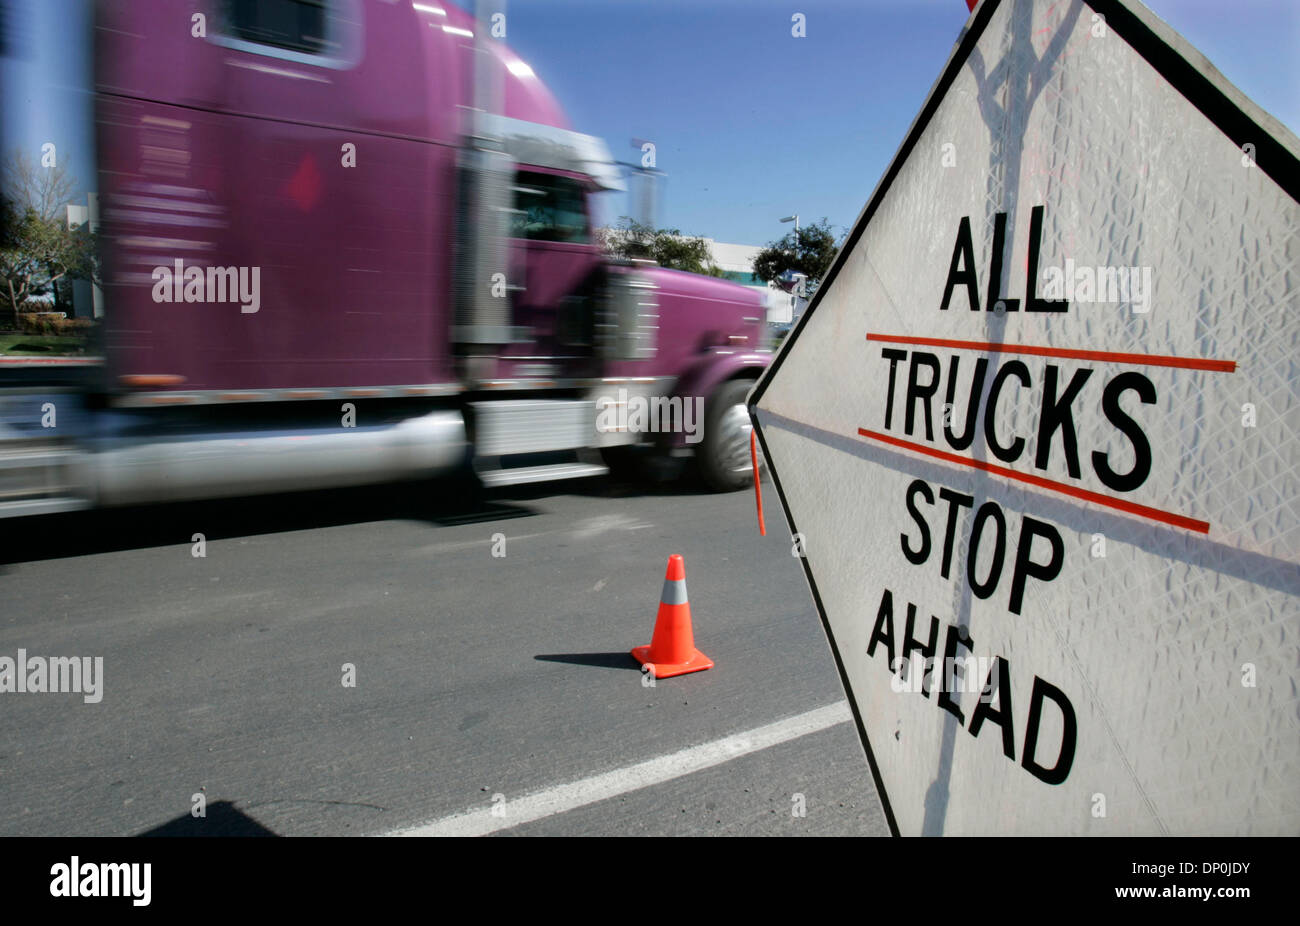 Mar 22, 2006; Otay Mesa, CA, USA; A truck heads for a California Air Resources Board and CHP inspection station on Sempre Viva Drive. Trucks on the road had their exhaust tested and those who failed the test were cited. Mandatory Credit: Photo by Howard Lipin/SDU-T/ZUMA Press. (©) Copyright 2006 by SDU-T Stock Photo